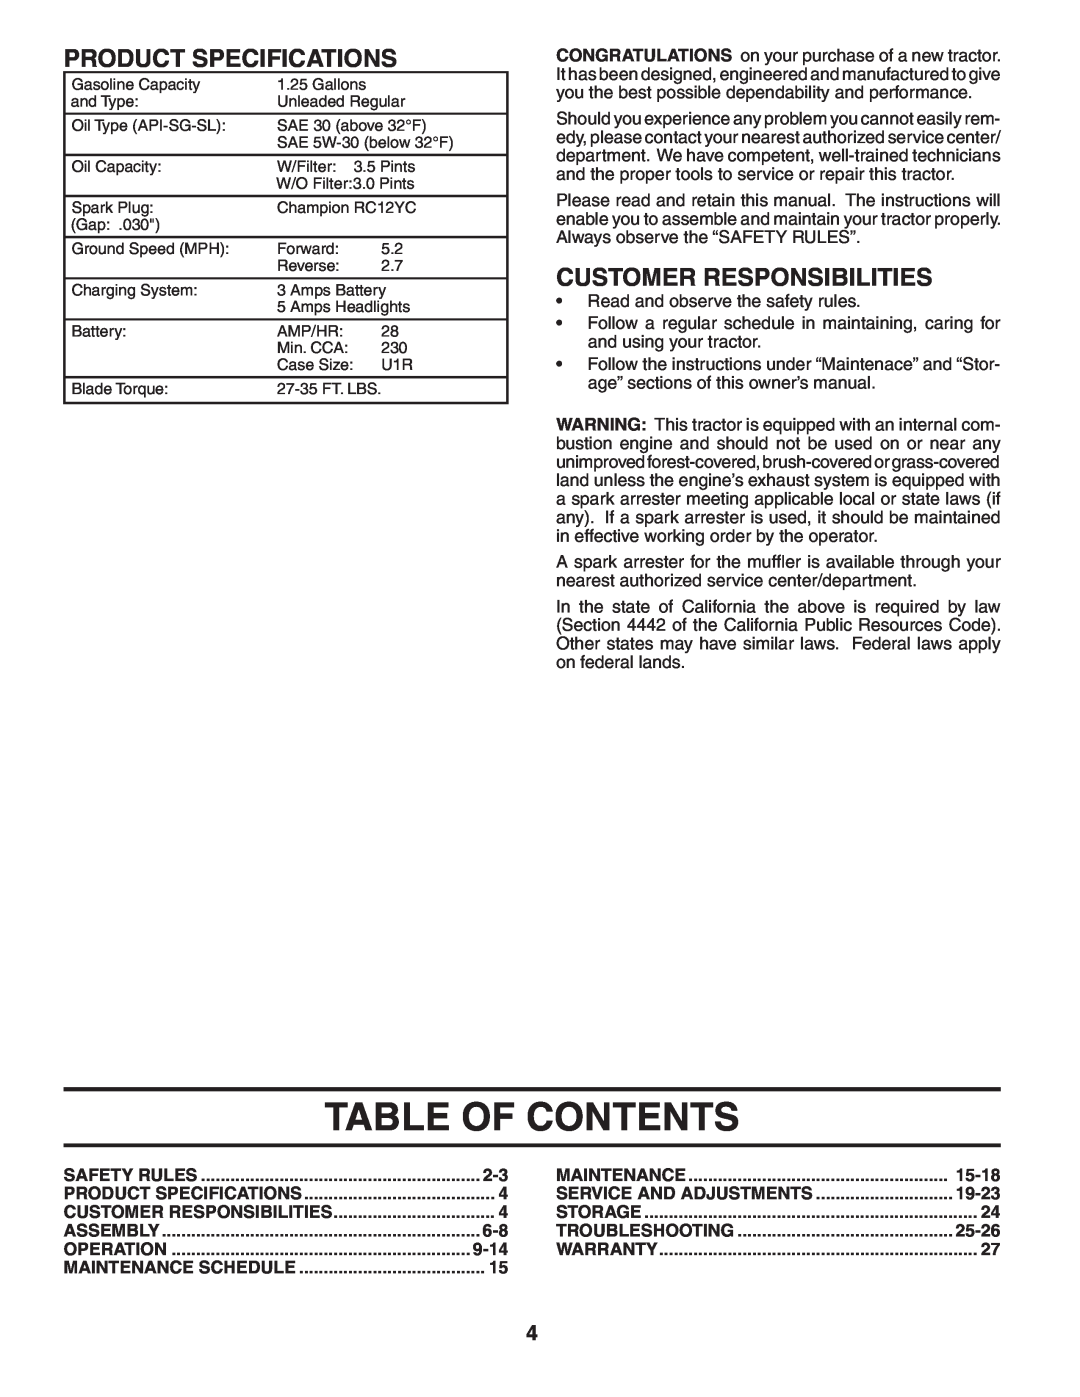 Poulan 405327 manual Table Of Contents, Product Specifications, Customer Responsibilities 